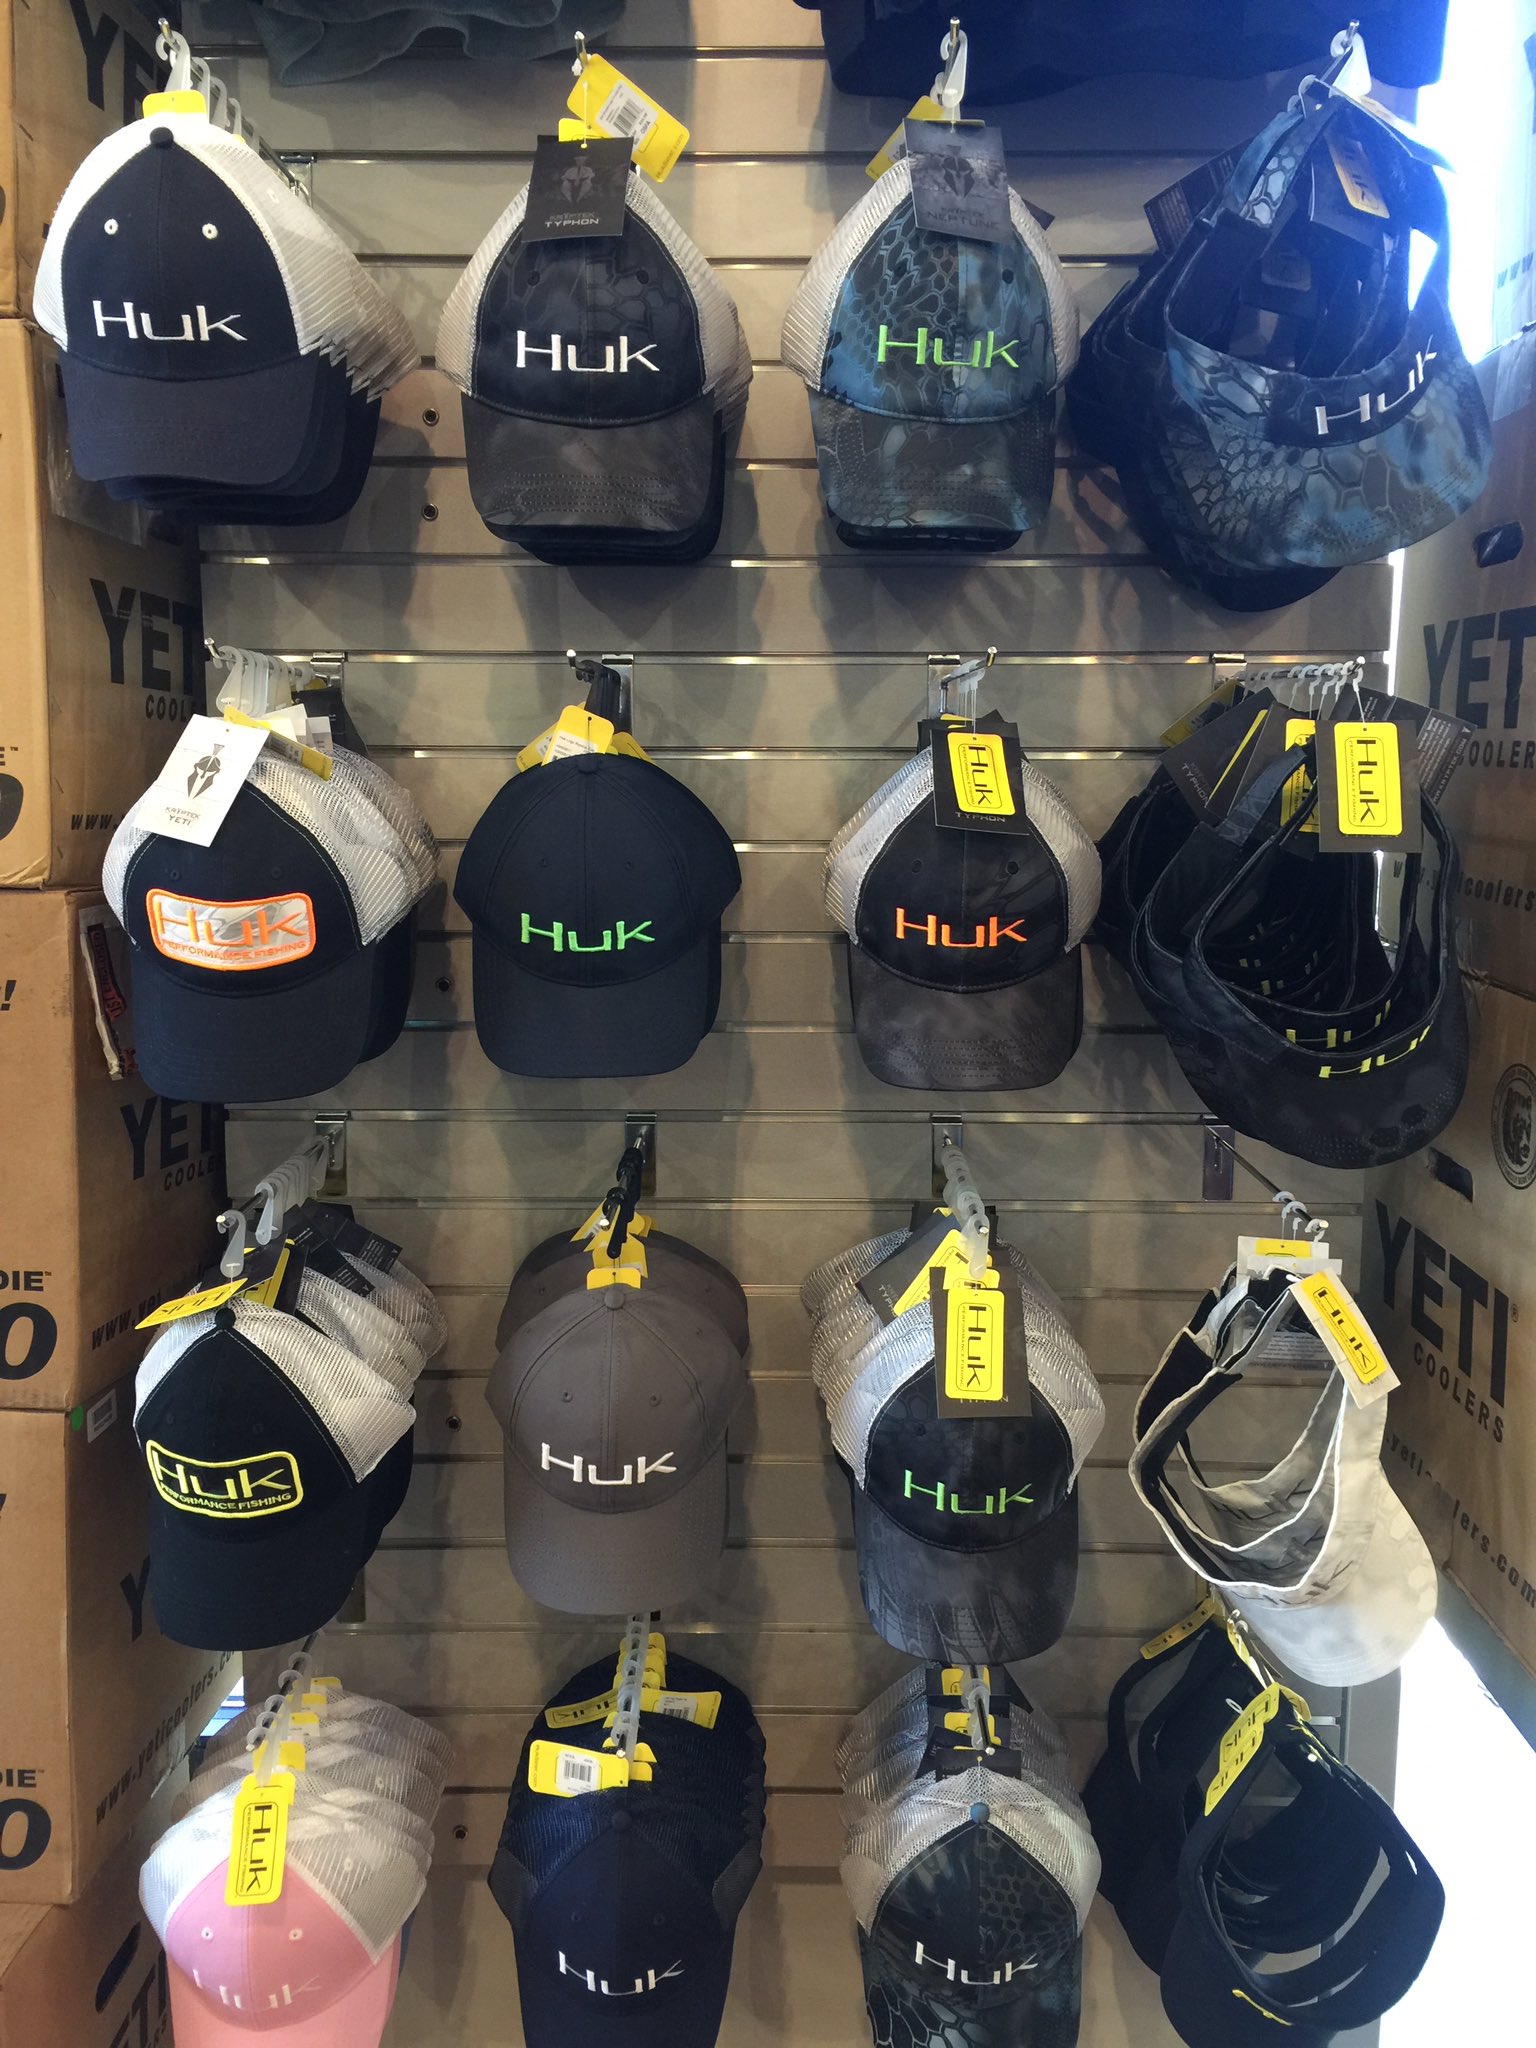 Bink's Outfitters on X: Huk hats and visors $19.99 - $24.99 #hukfishing  #hukgear #HUK #binksoutfitters  / X